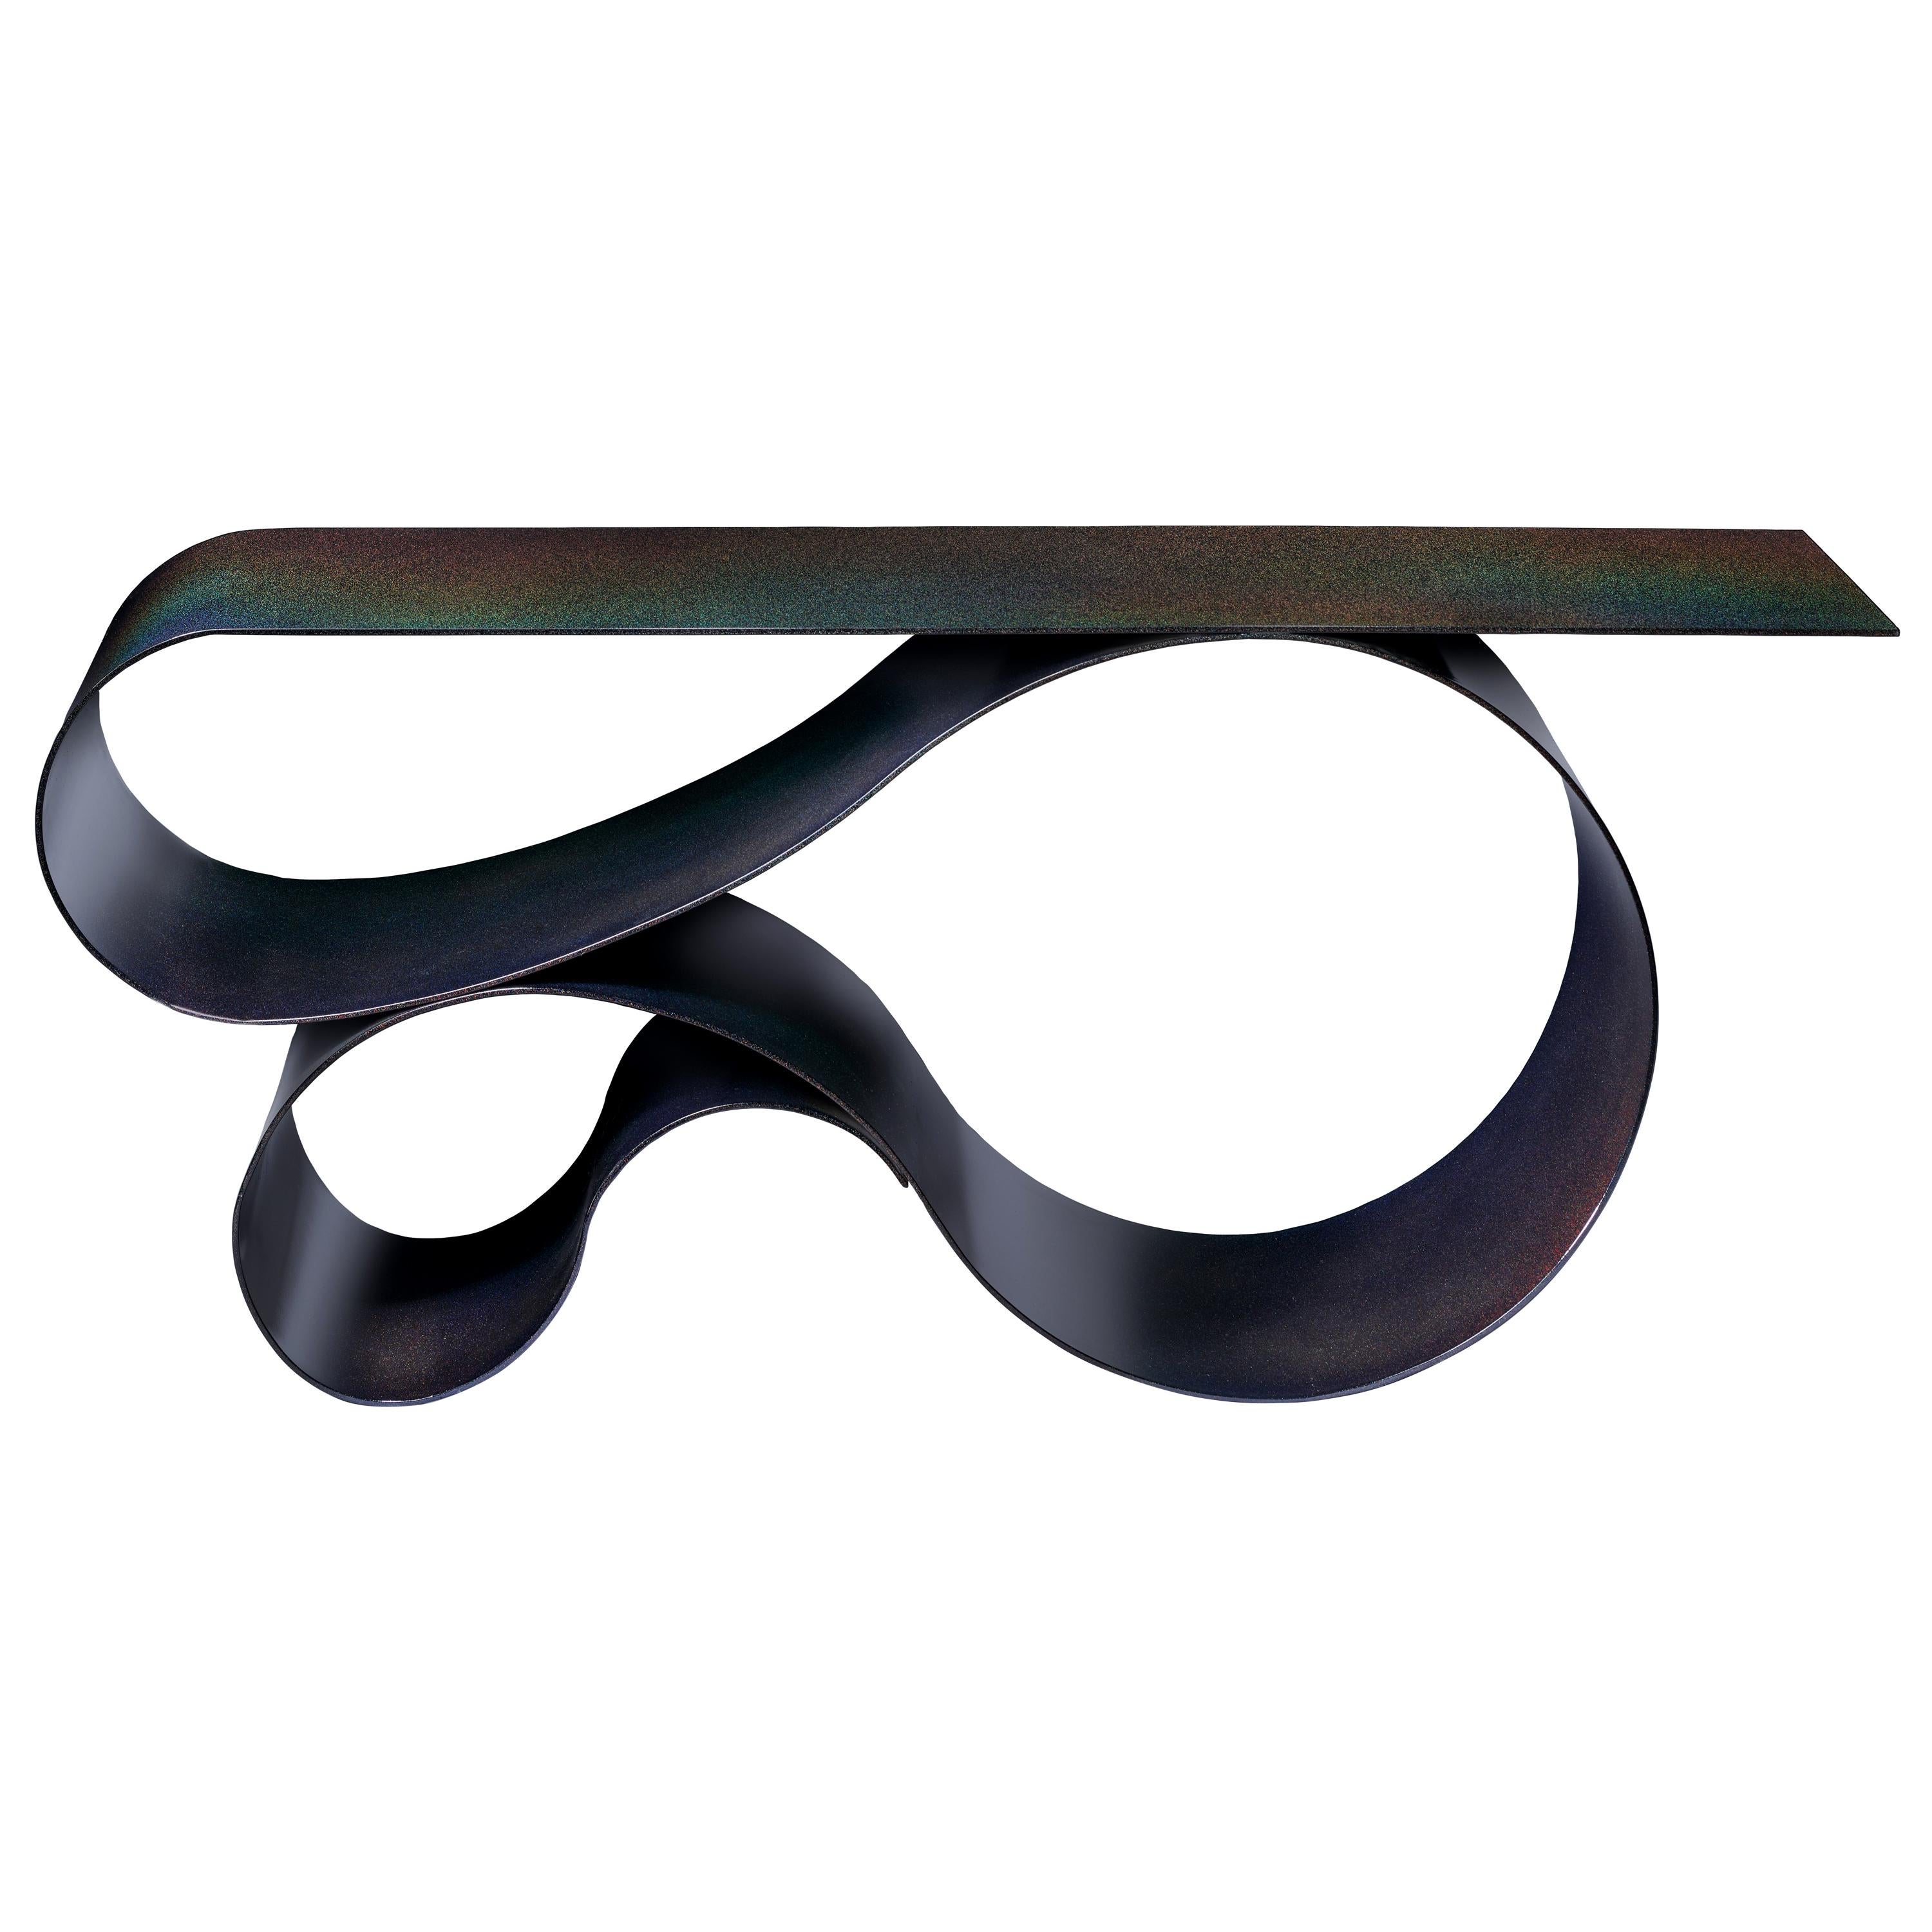 Whorl Console, in Black Iridescent Powder Coated Aluminum by Neal Aronowitz